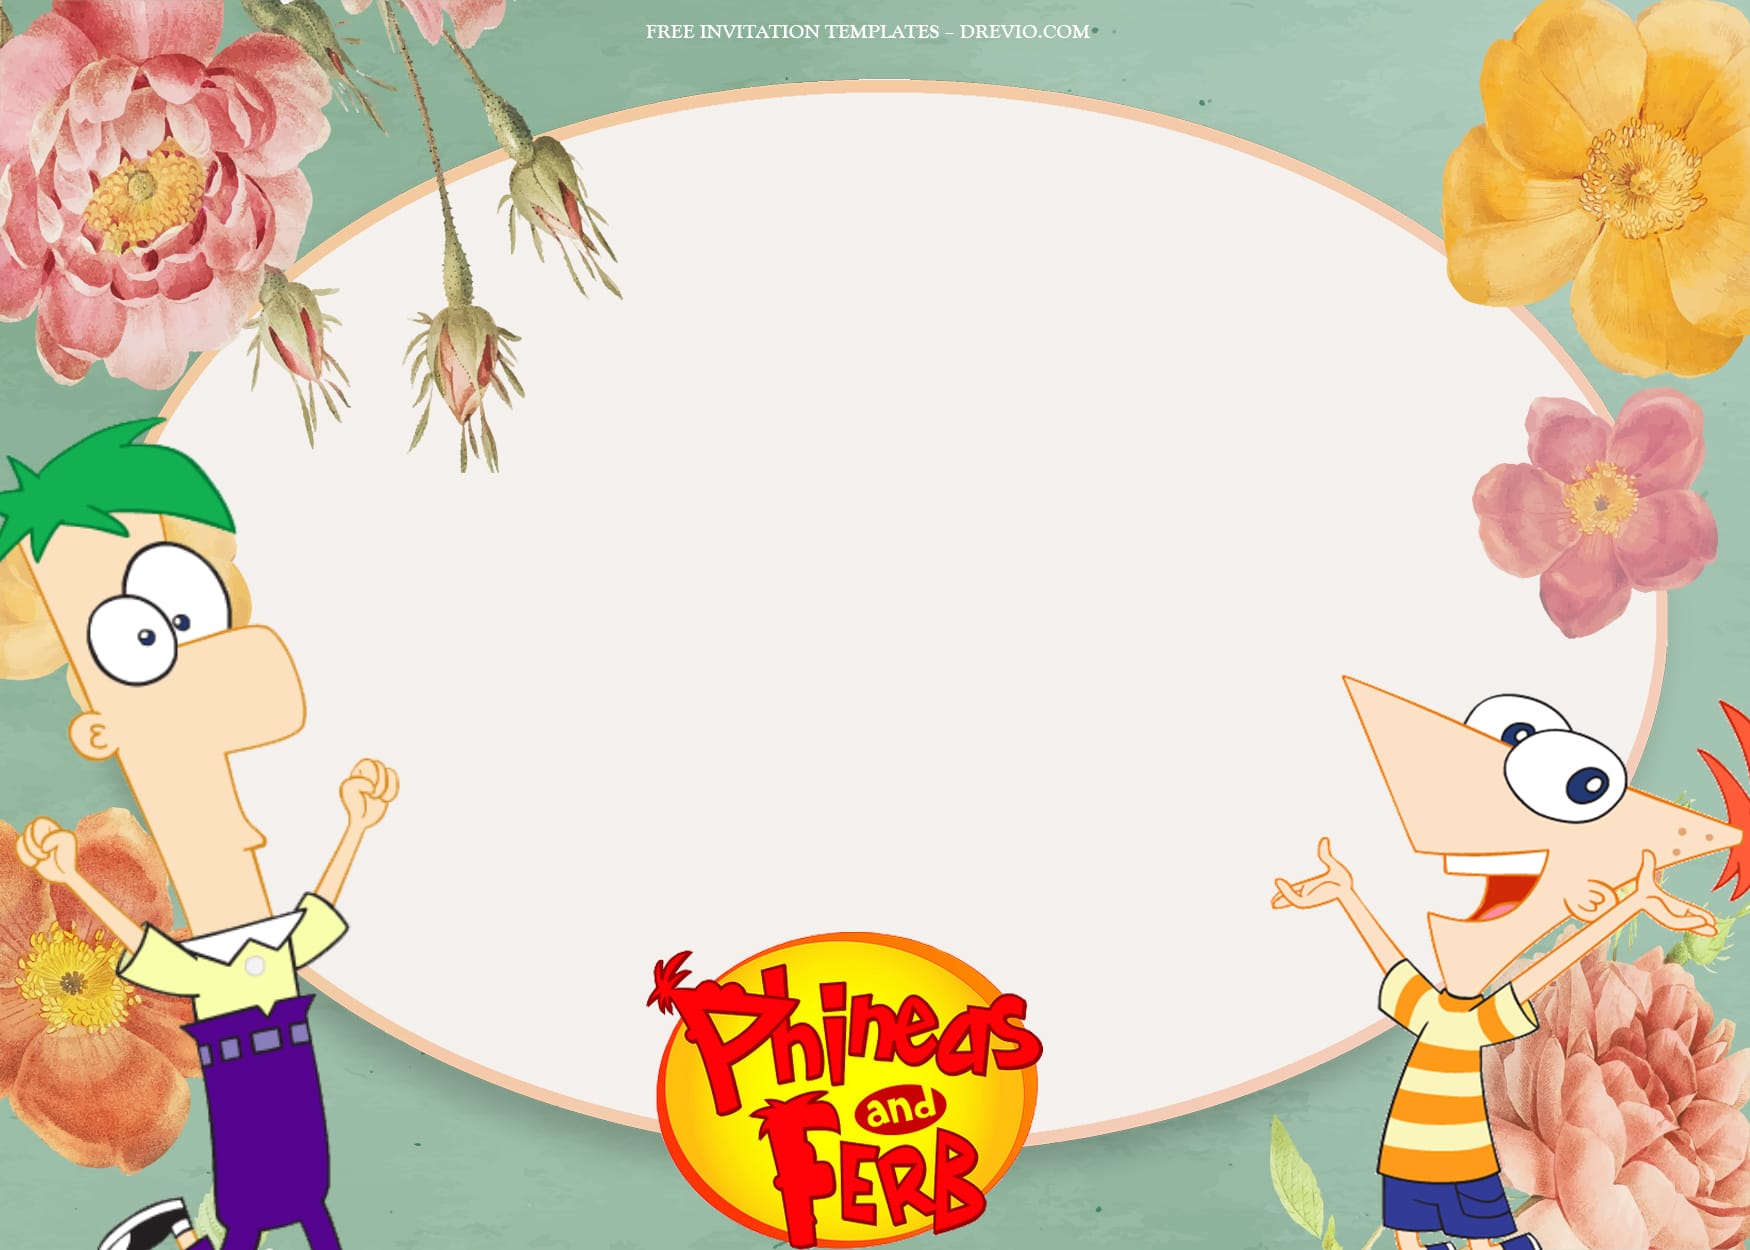 7+ Adventure Together Phineas And Ferb Birthday Invitation Templates Type Five